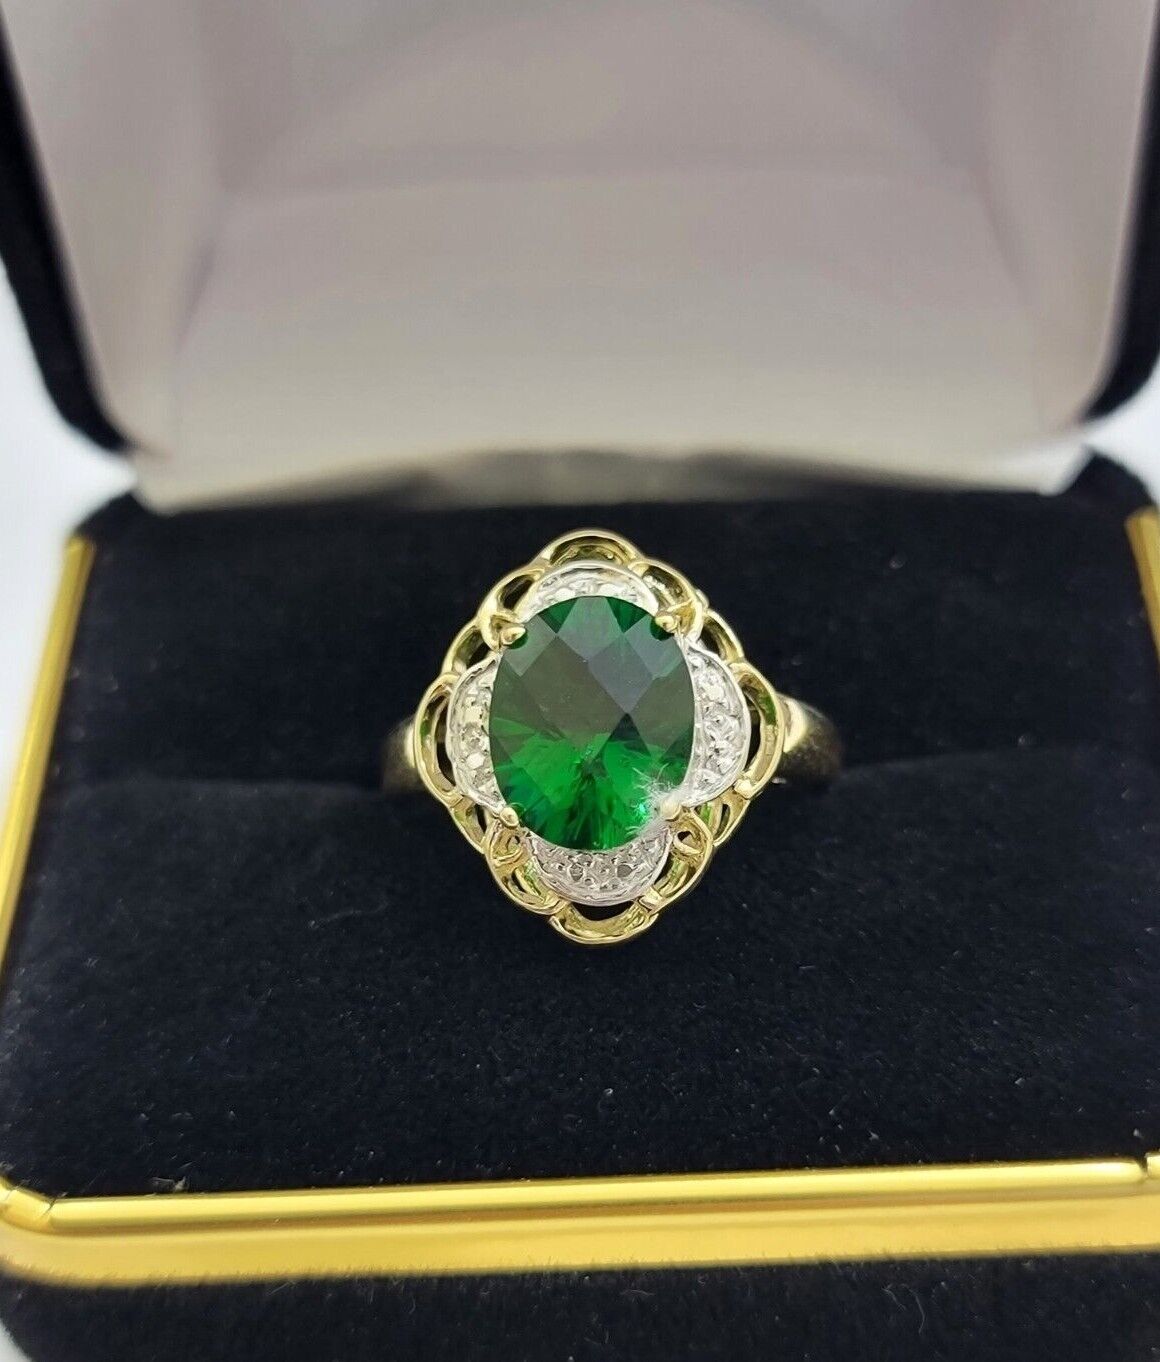 10k Yellow Gold Ladies Green Ring Women's Casual Band SALE Real 10kt Brand New